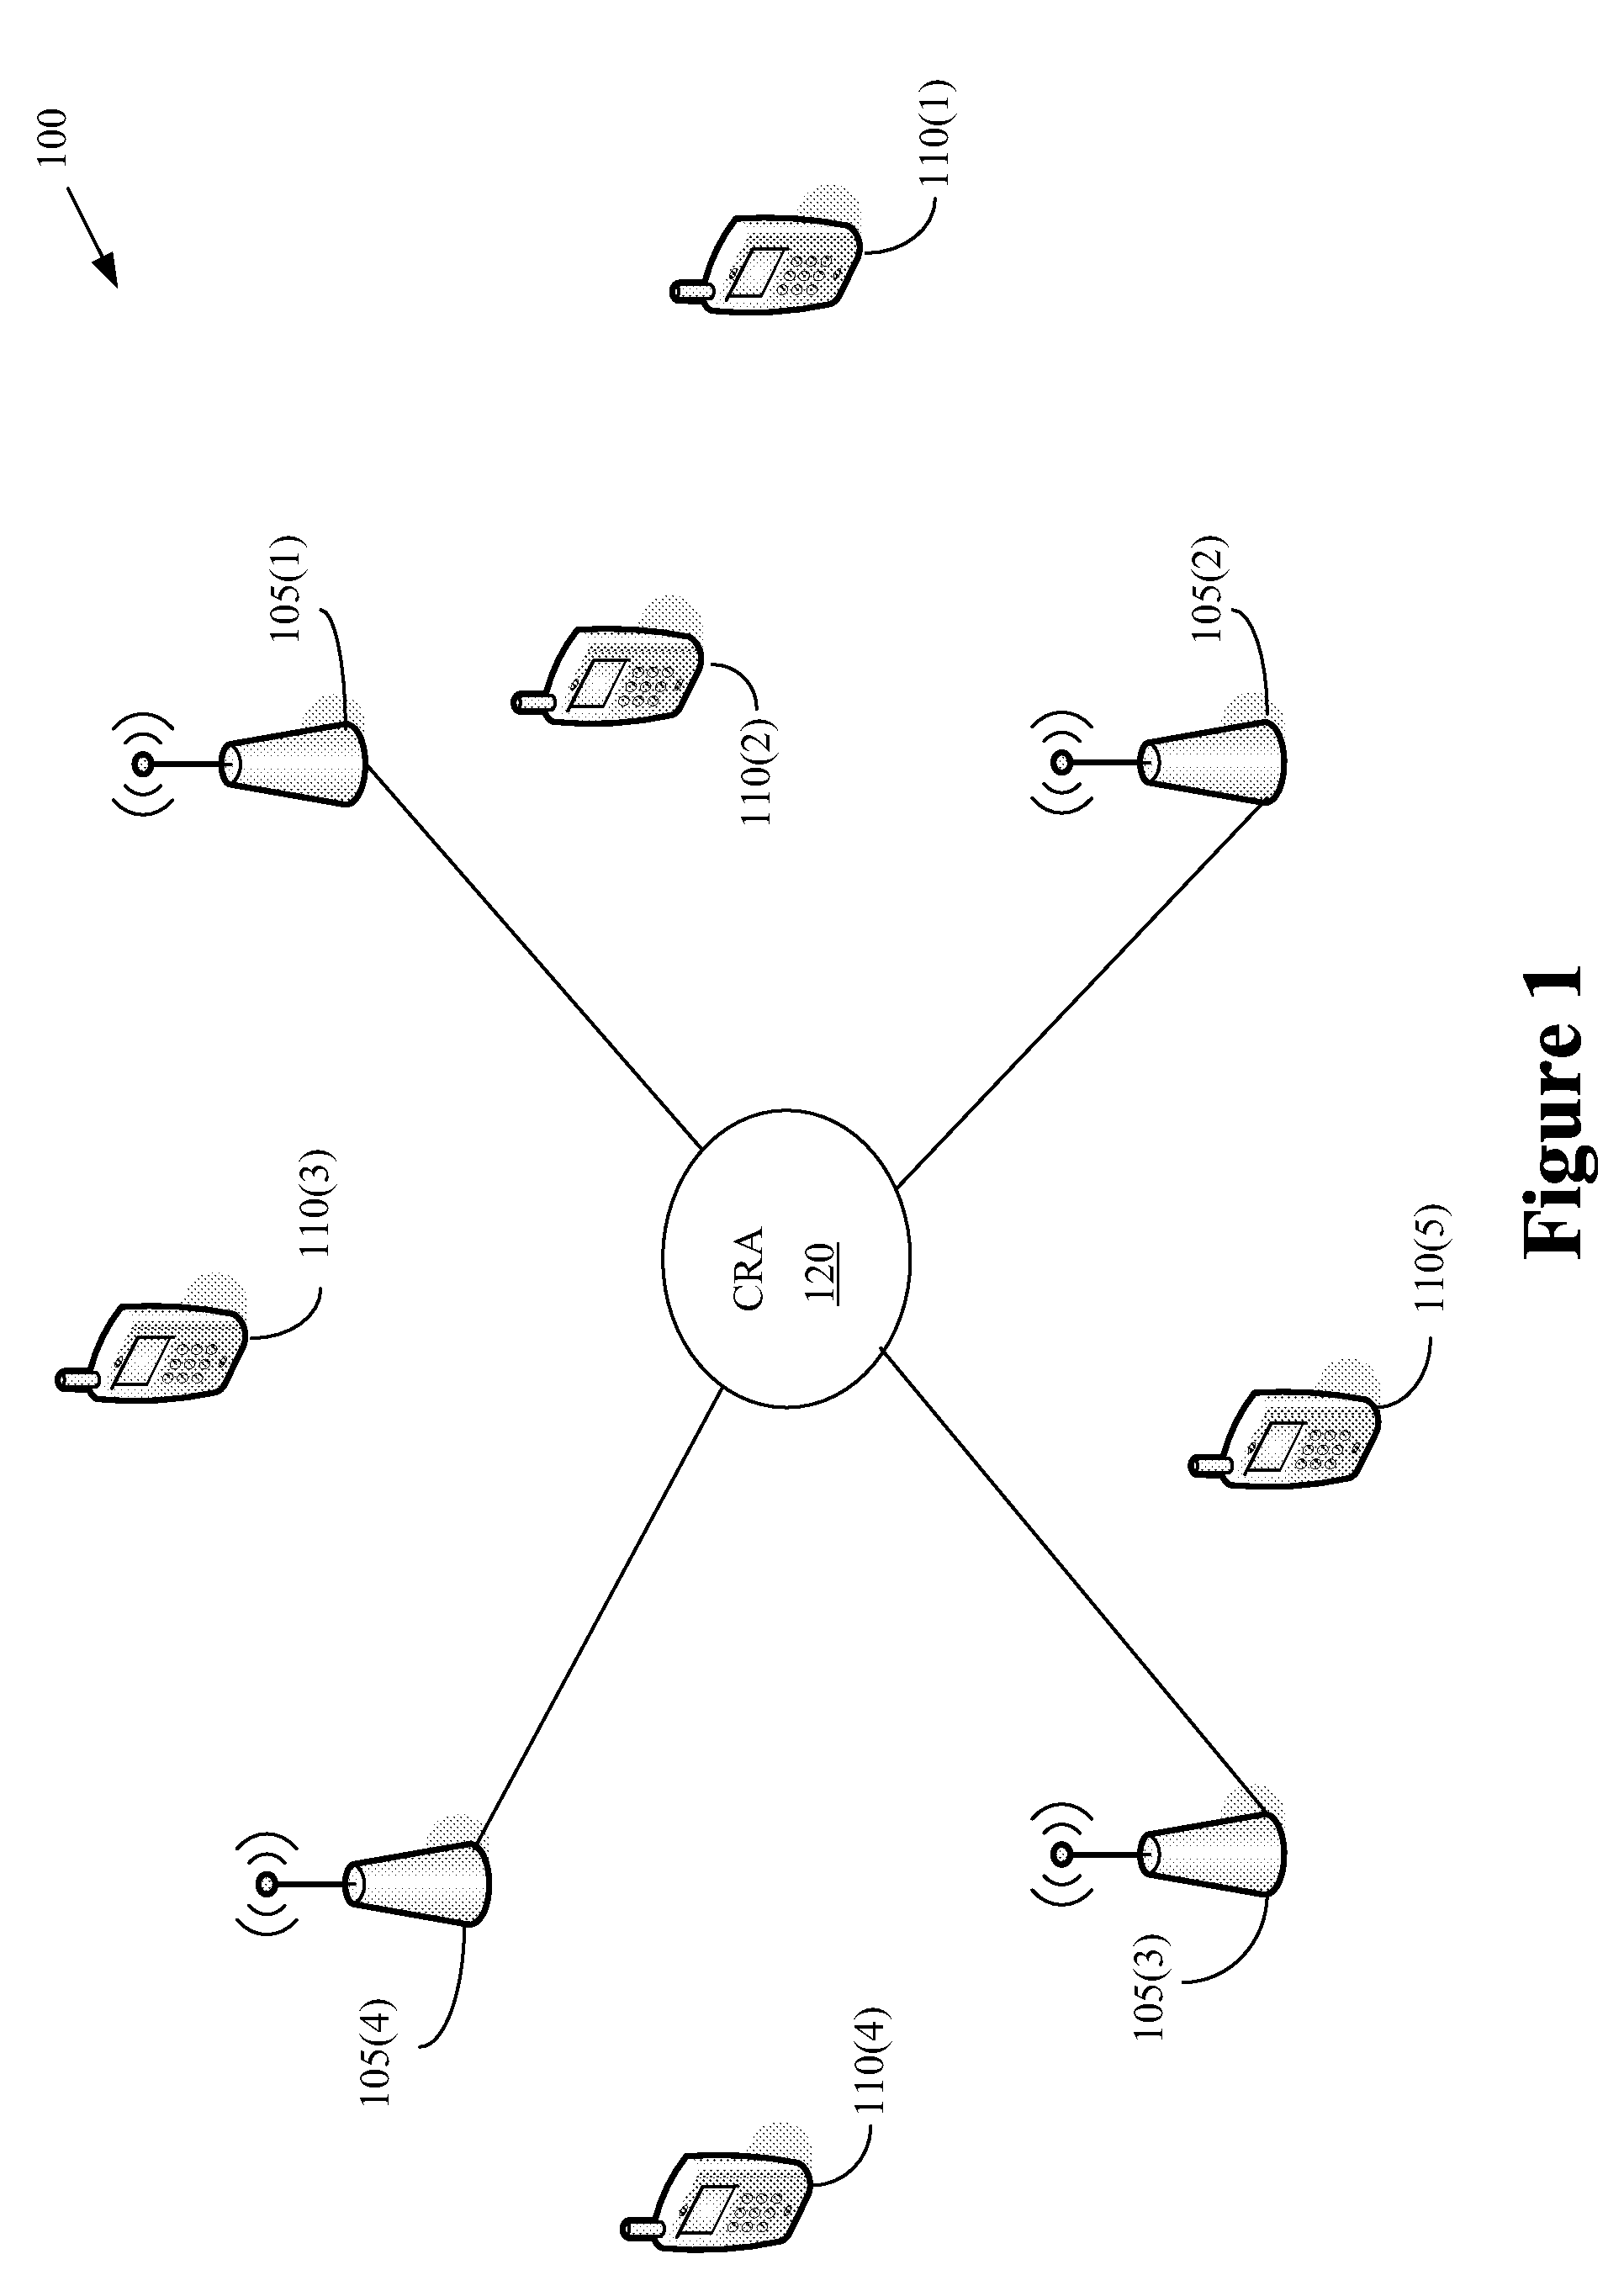 Method of joint resource allocation and clustering of base stations